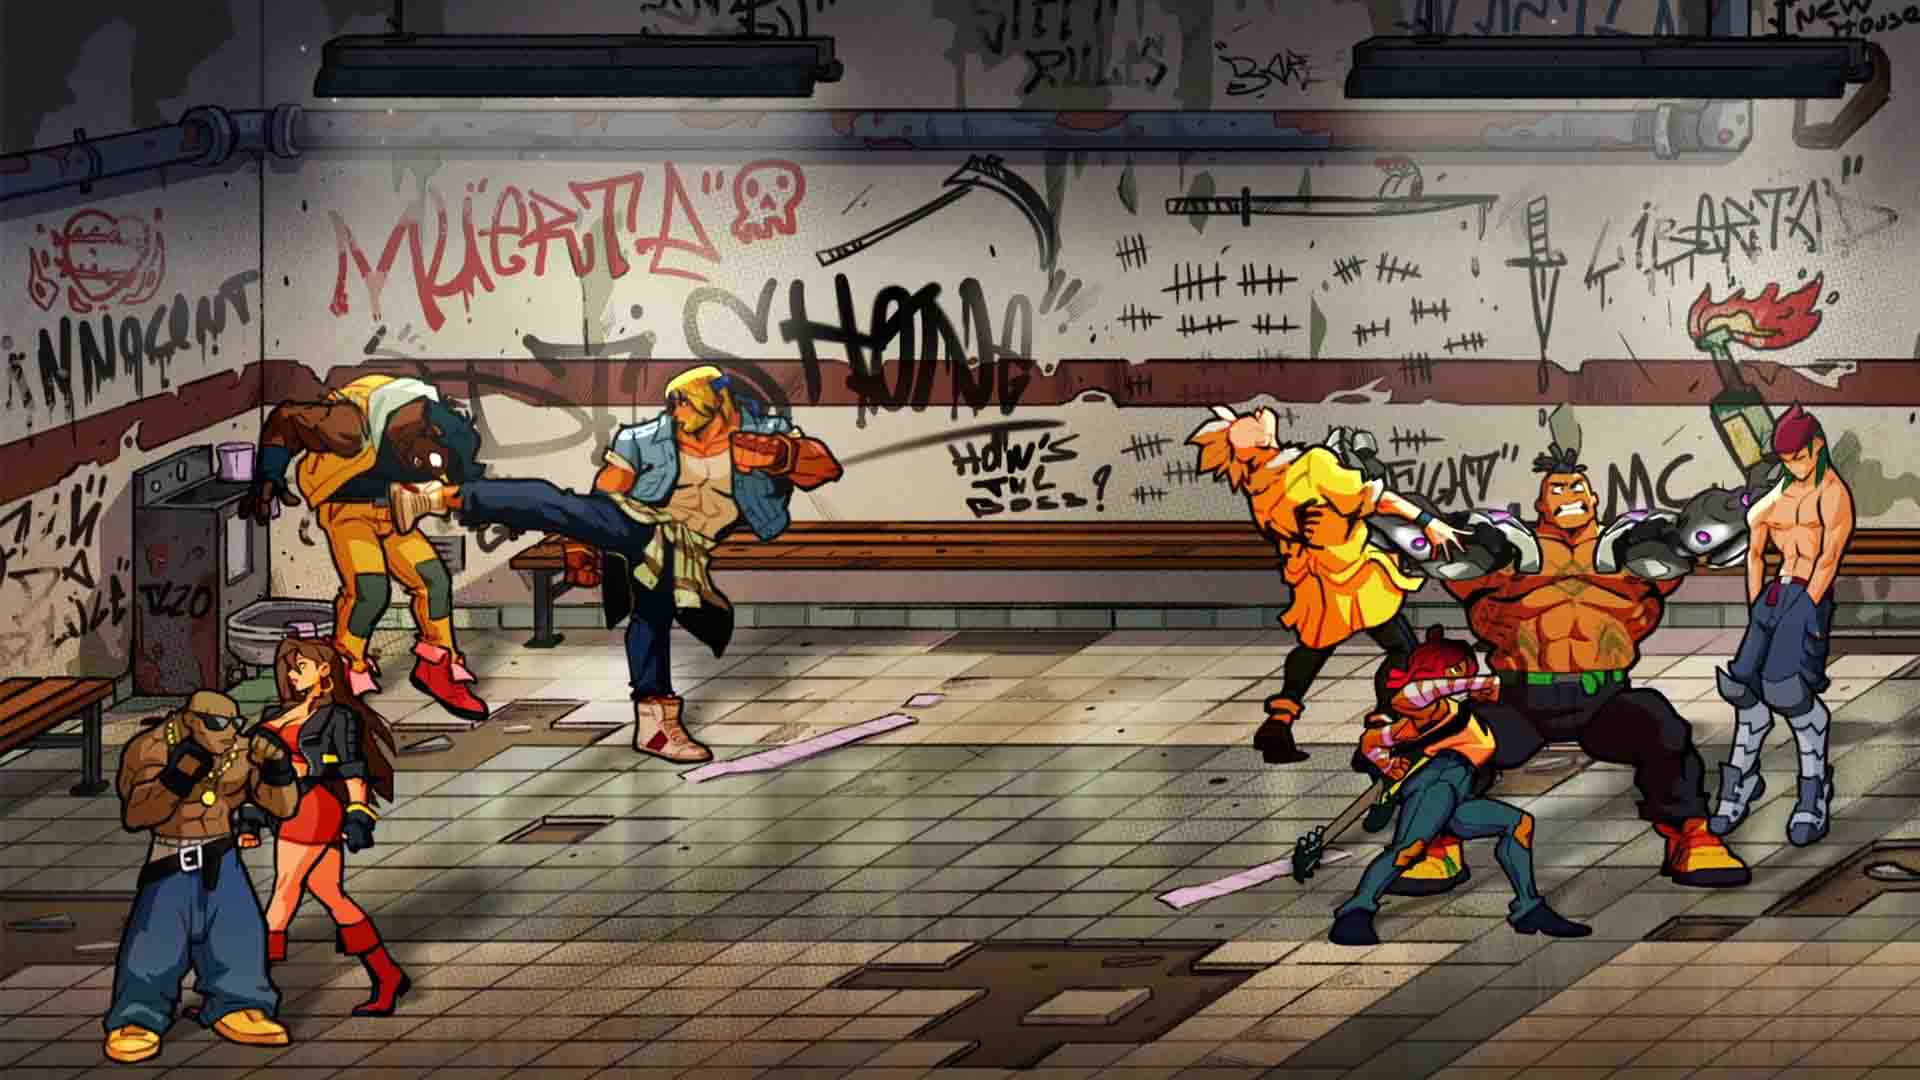 Streets of Rage 4 “Mr. X Nightmare” DLC Adds 3 New Fighters, Survival Mode,  and More Today